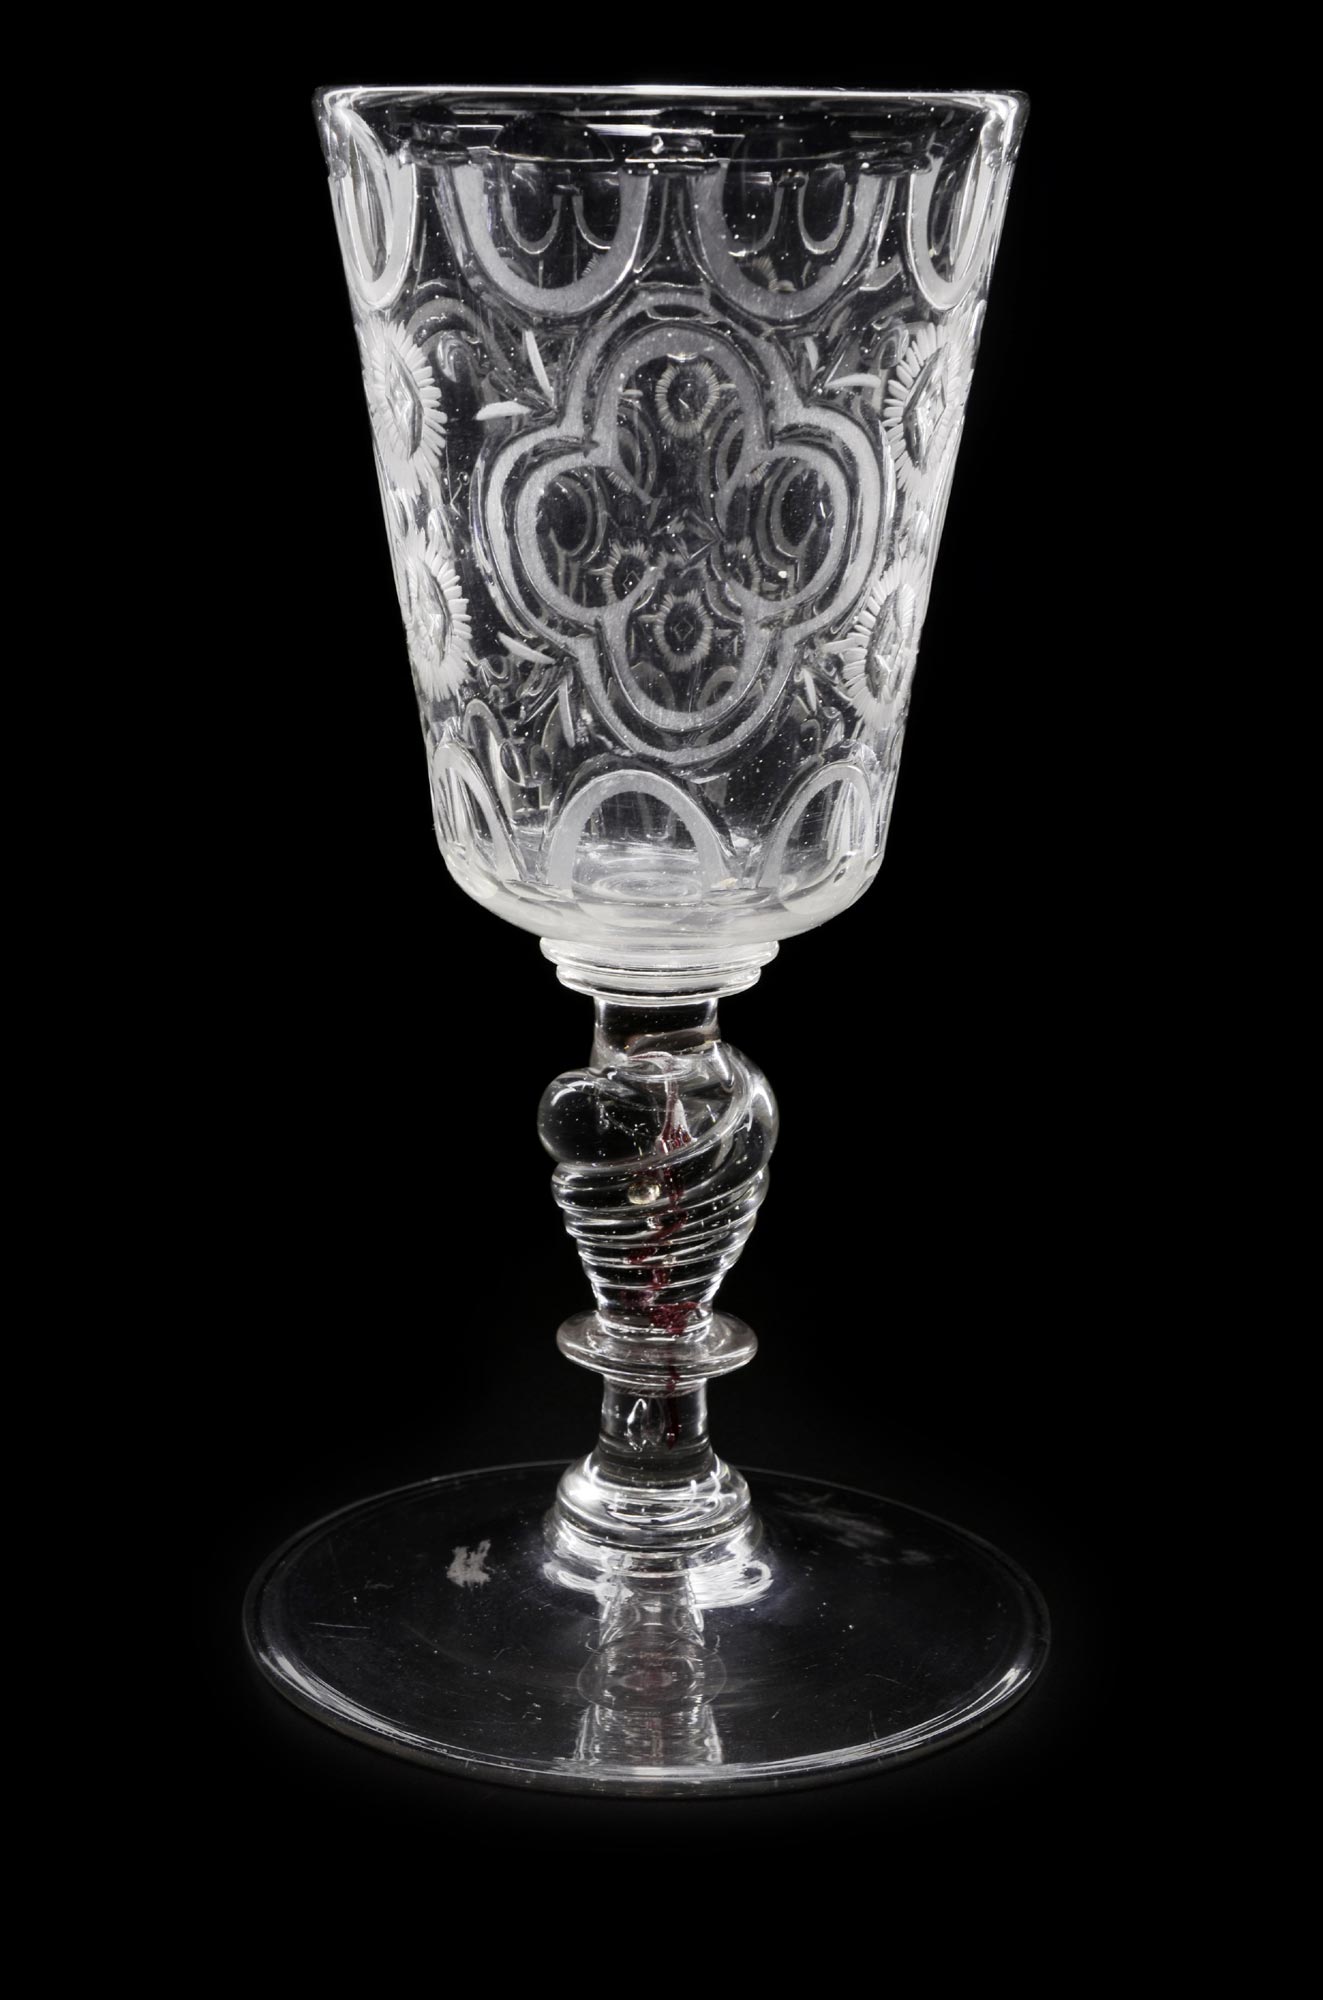 TWO CLASSICISTIC GOBLETS  Bohemia, 2nd half of 18th century. Conic goblet of clear glass on baluster